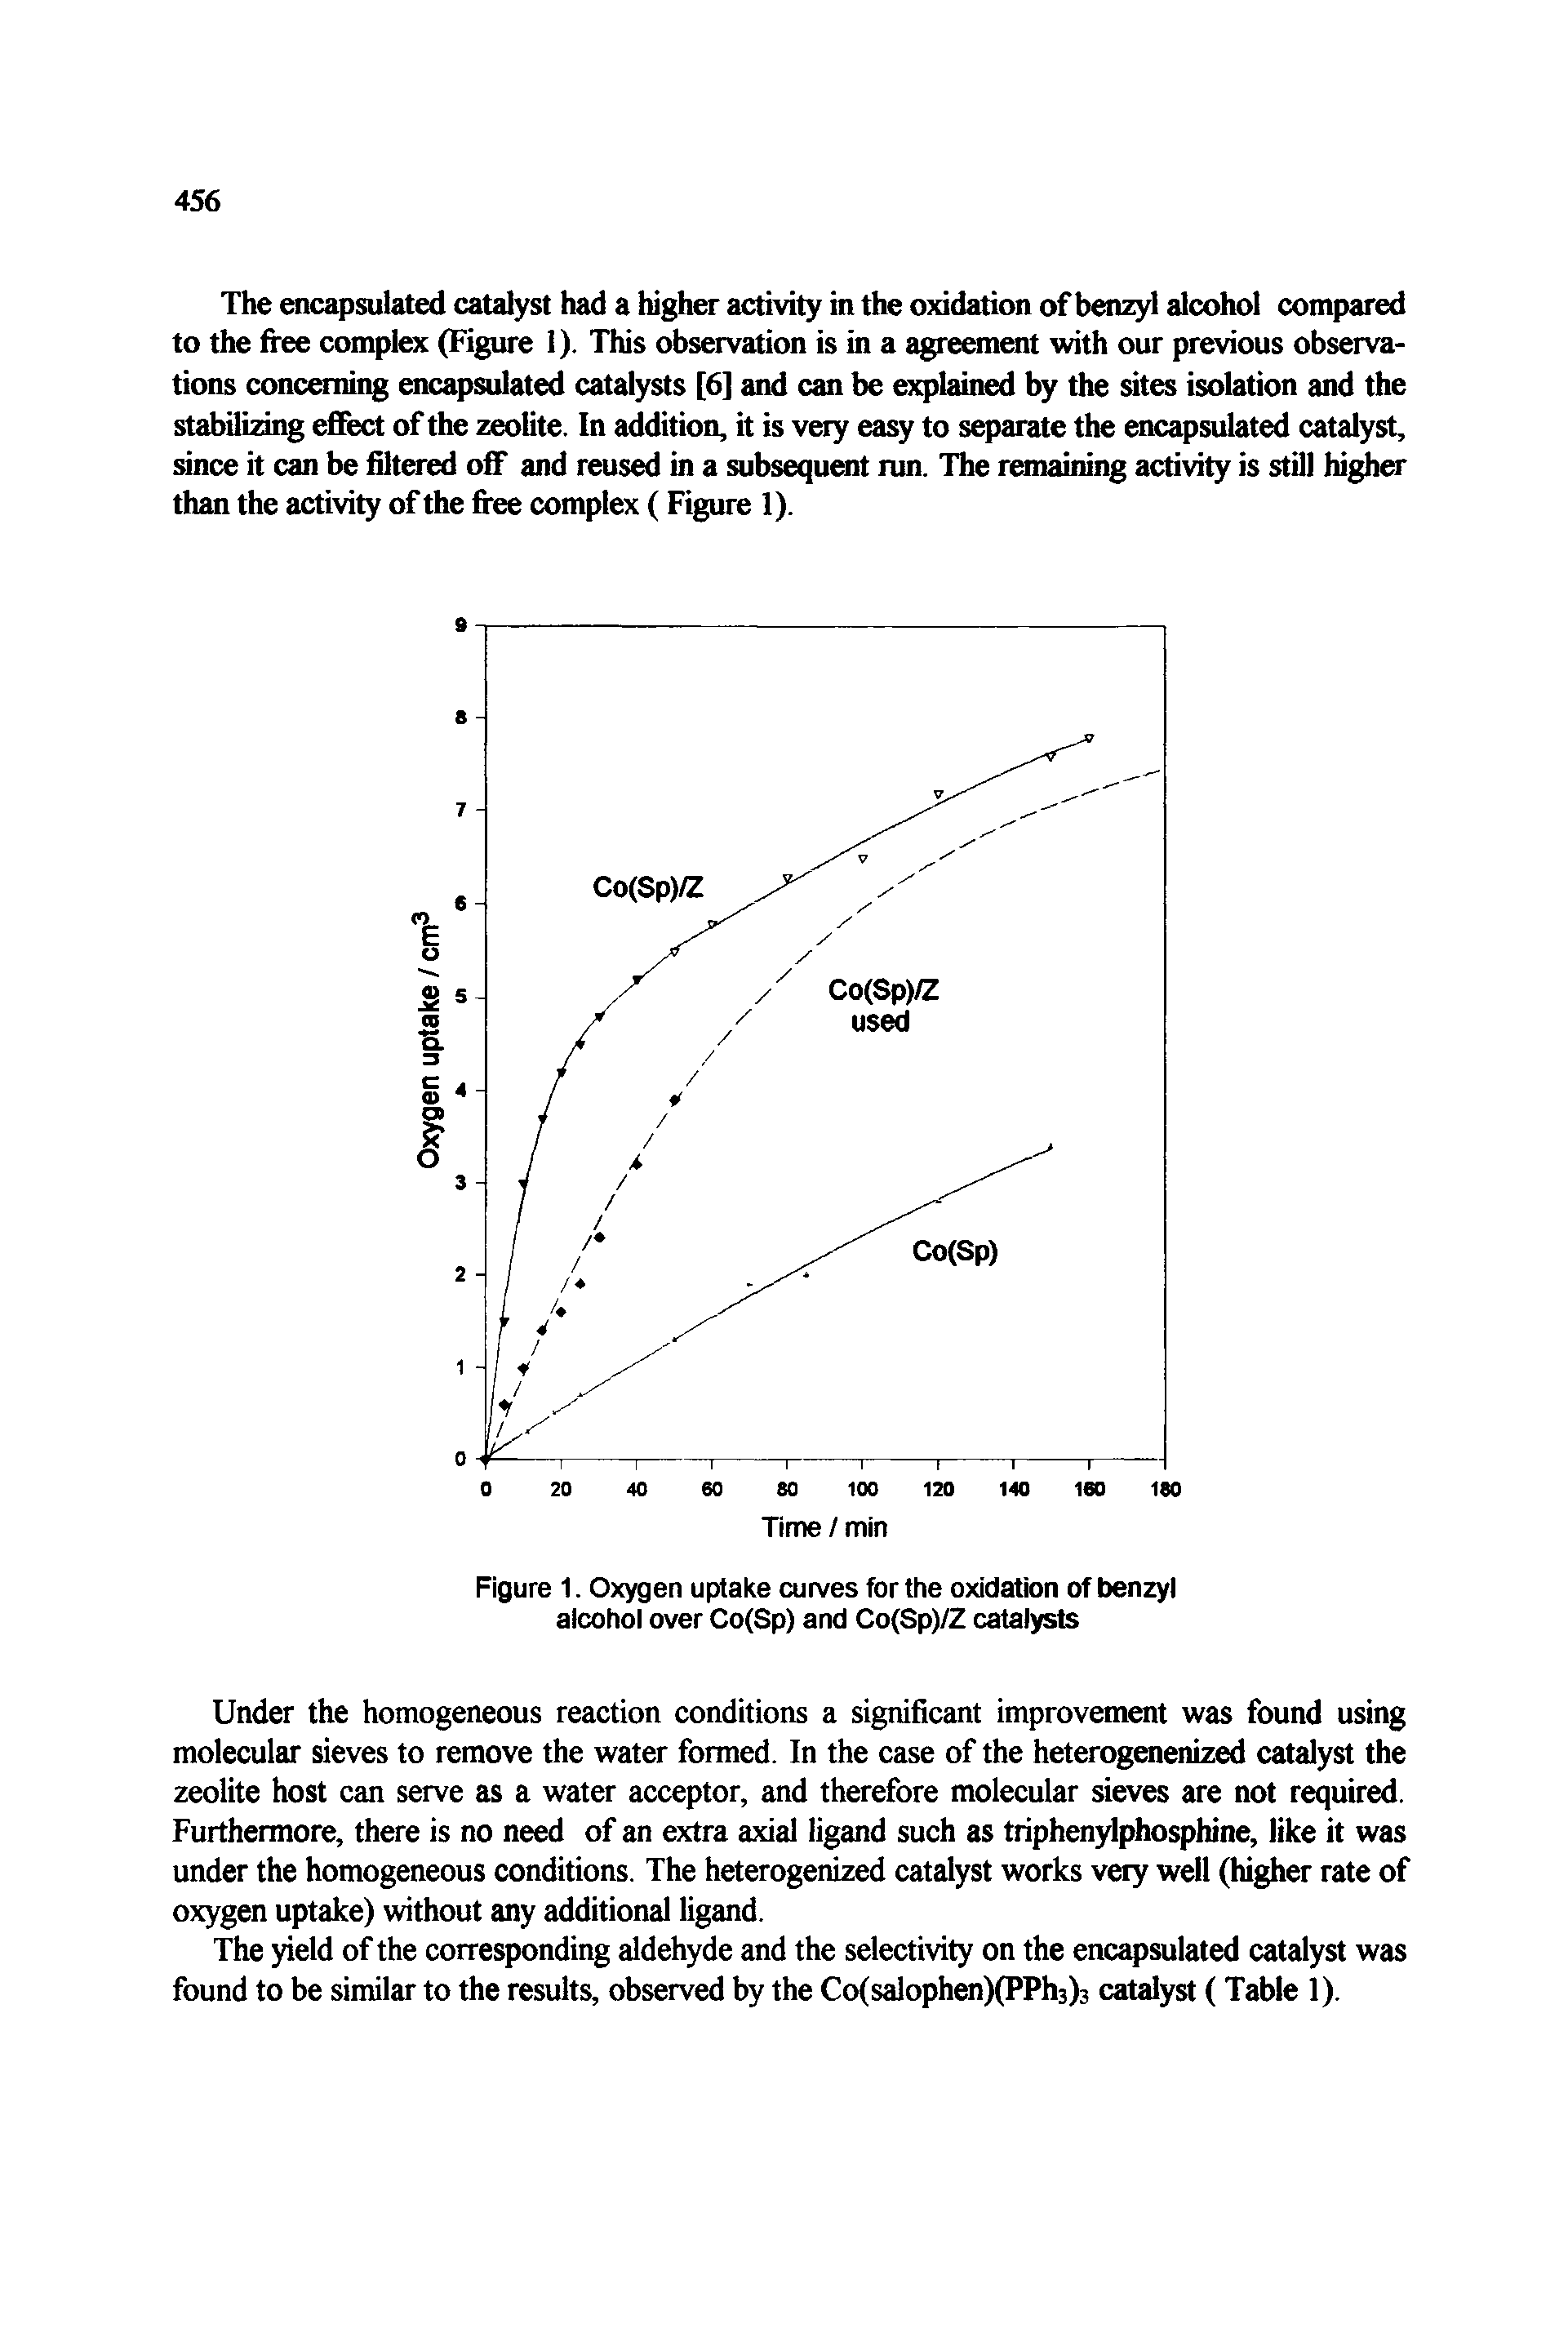 Figure 1. Oxygen uptake curves for the oxidation of benzyl alcohol over Co(Sp) and Co(Sp)/Z catalysts...